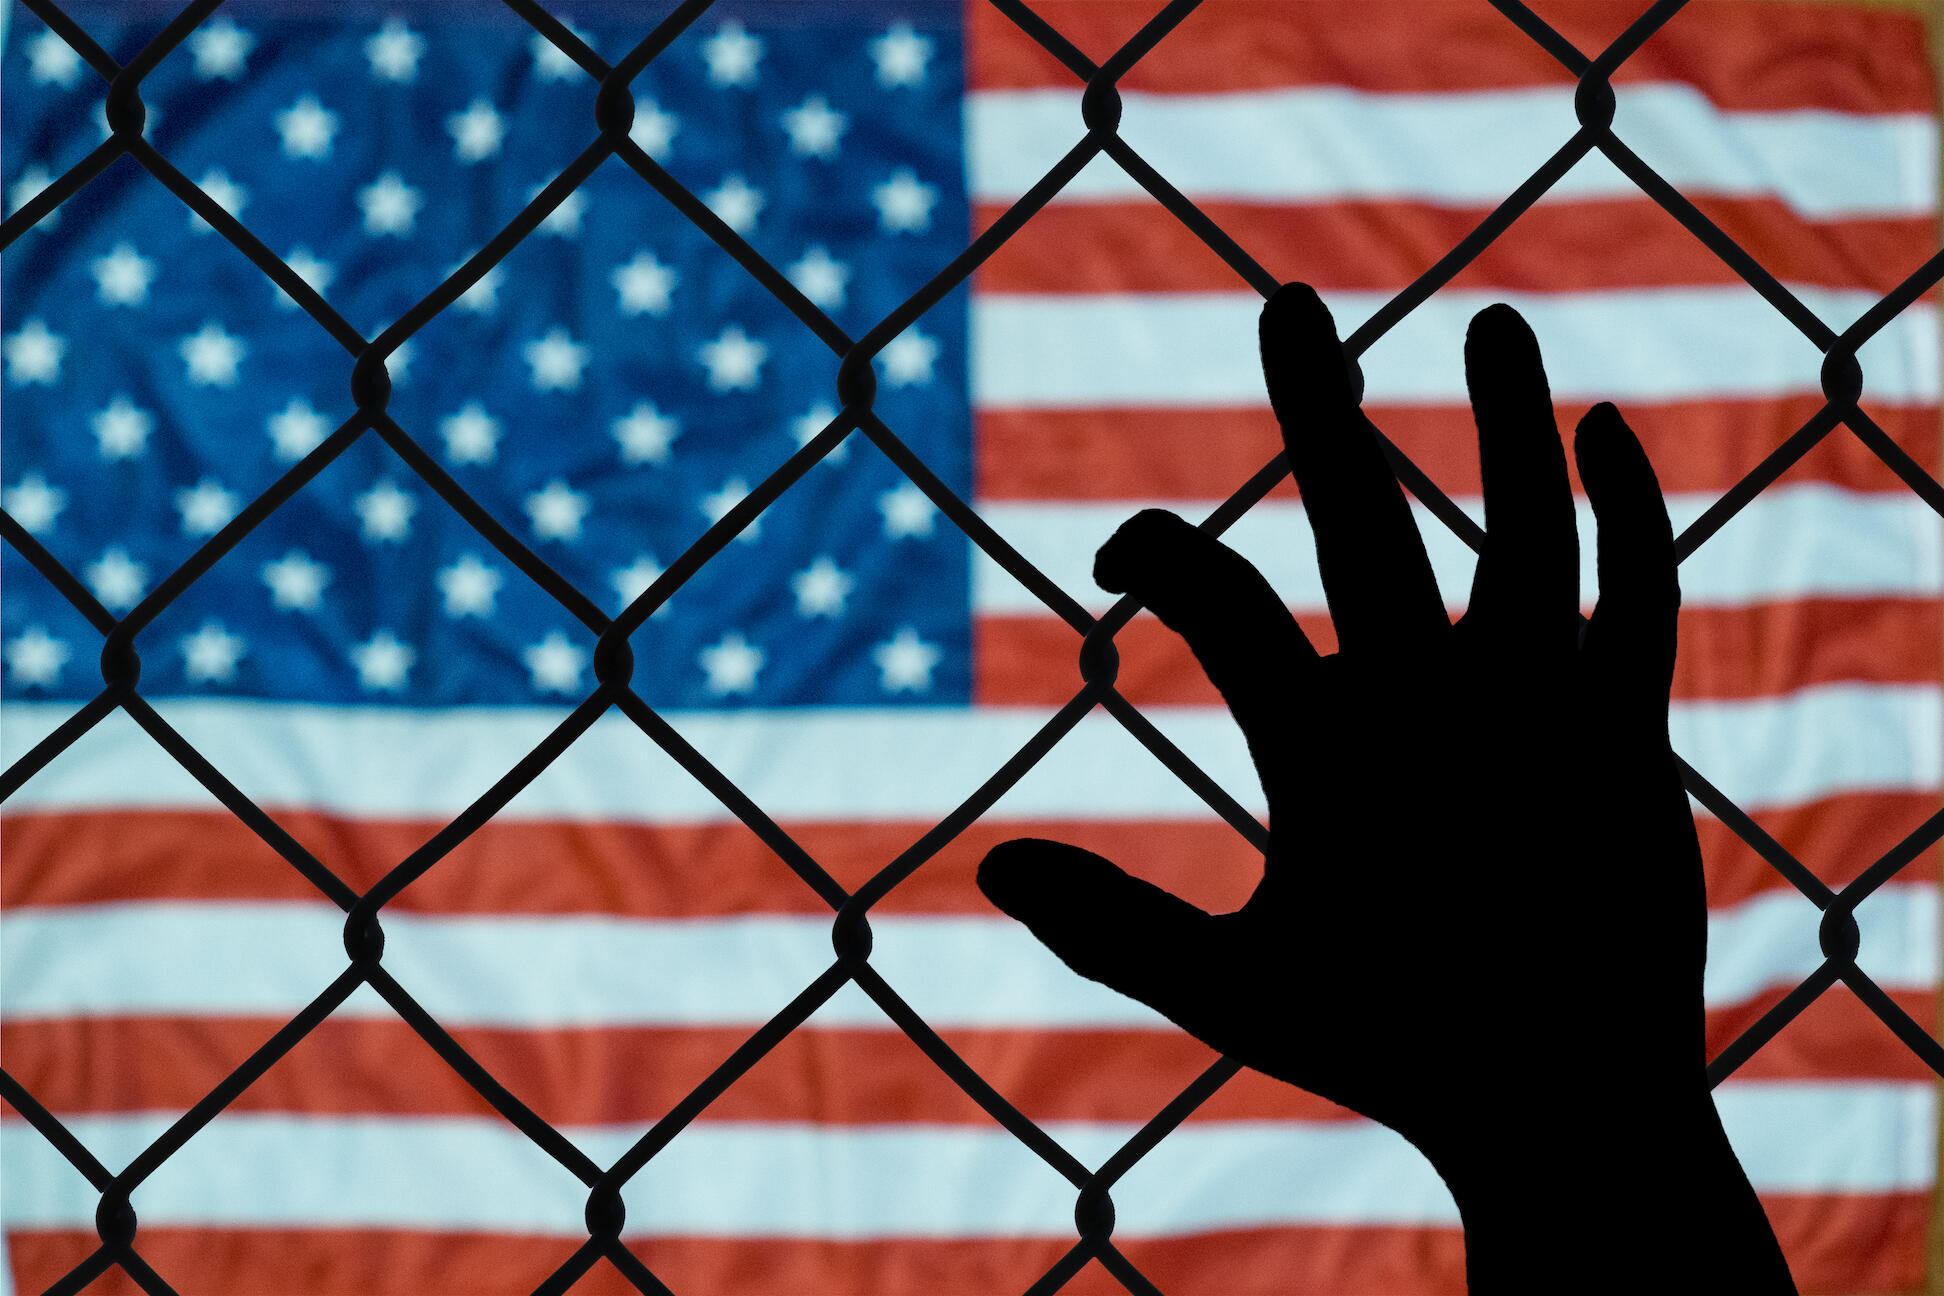 A hand grabs onto a wire fence. The flag of the United States of America is in the background.